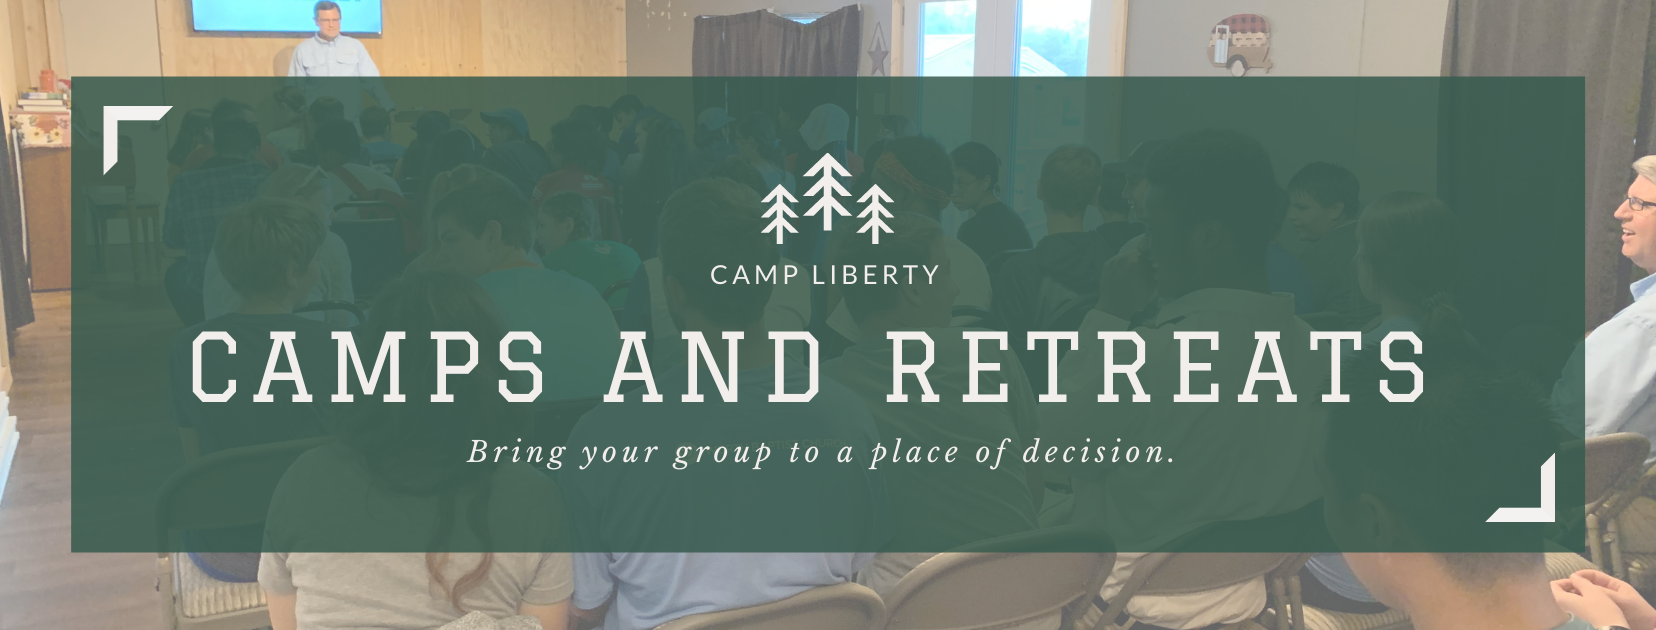 Camps and Retreats